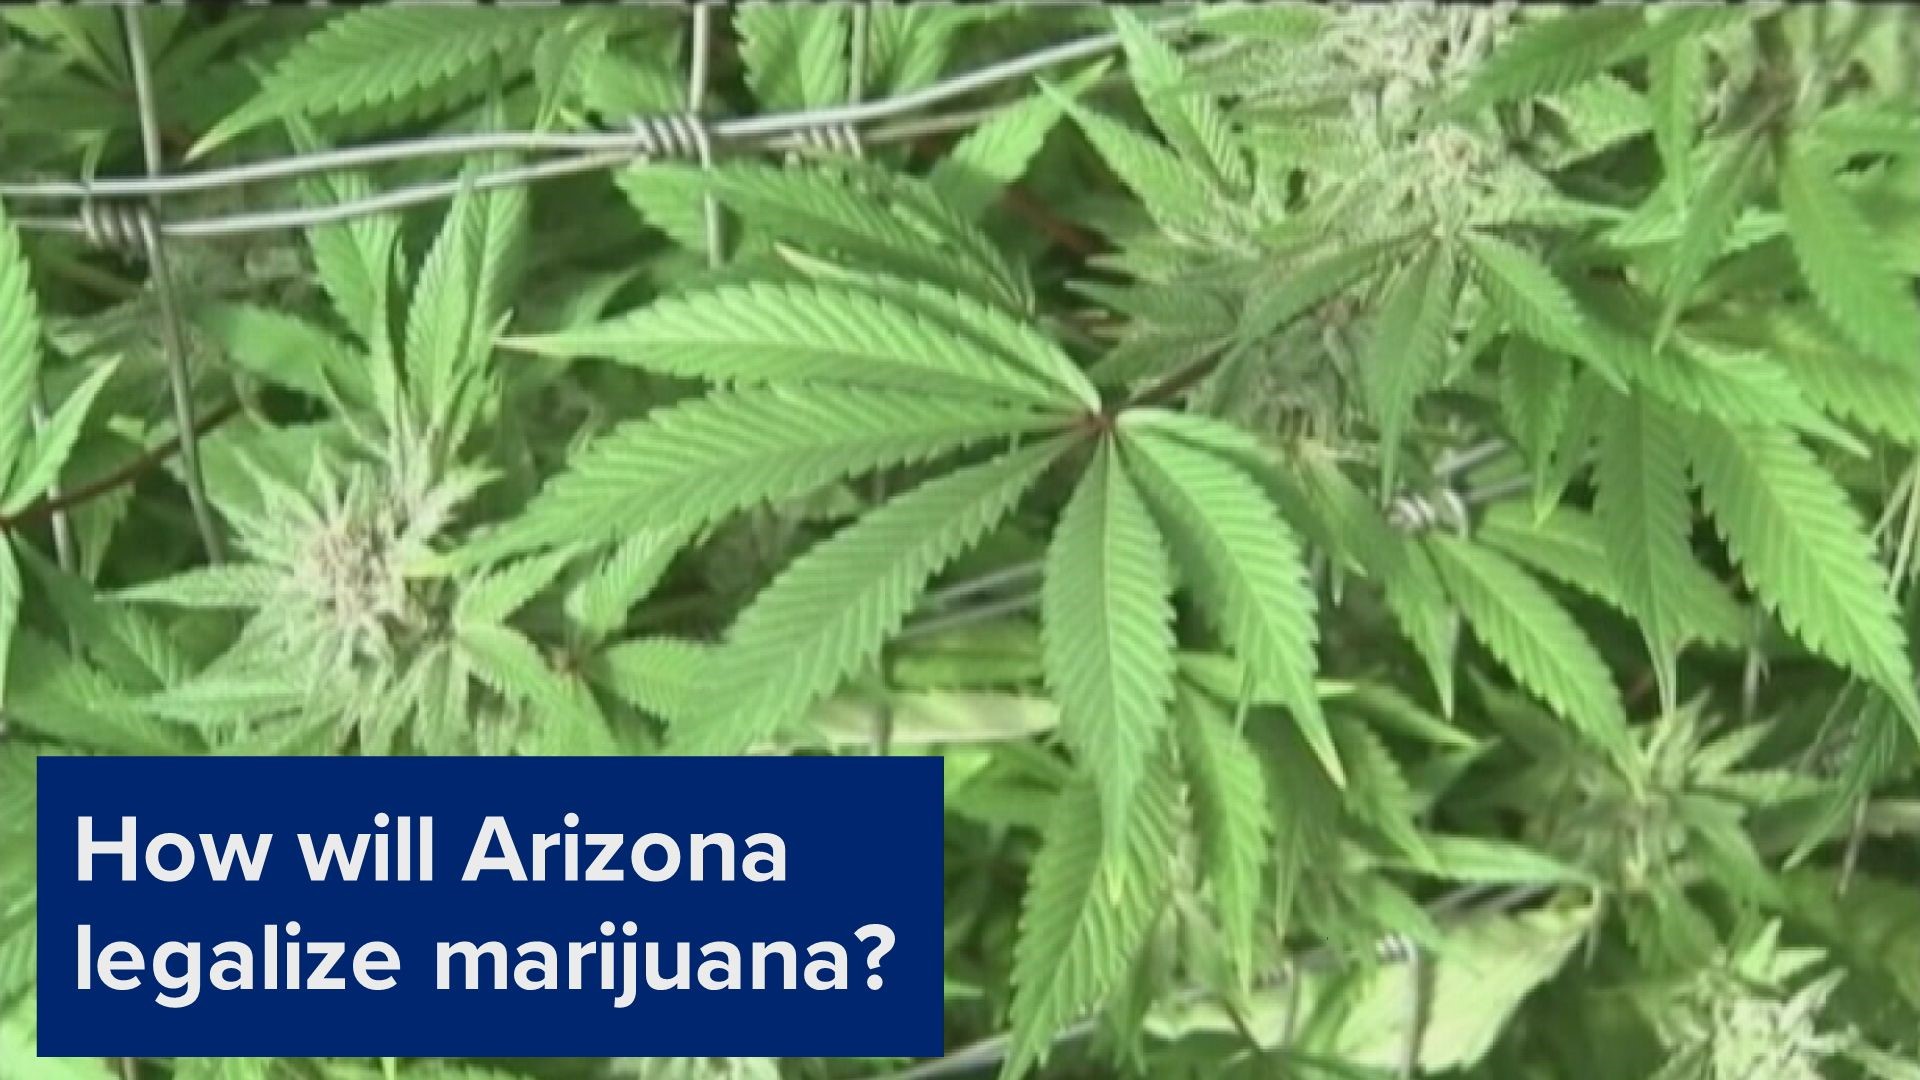 Arizona is expected to vote on legalizing recreational marijuana use again in 2020. There are two ways to do it: through voter referendum or a ballot initiative.